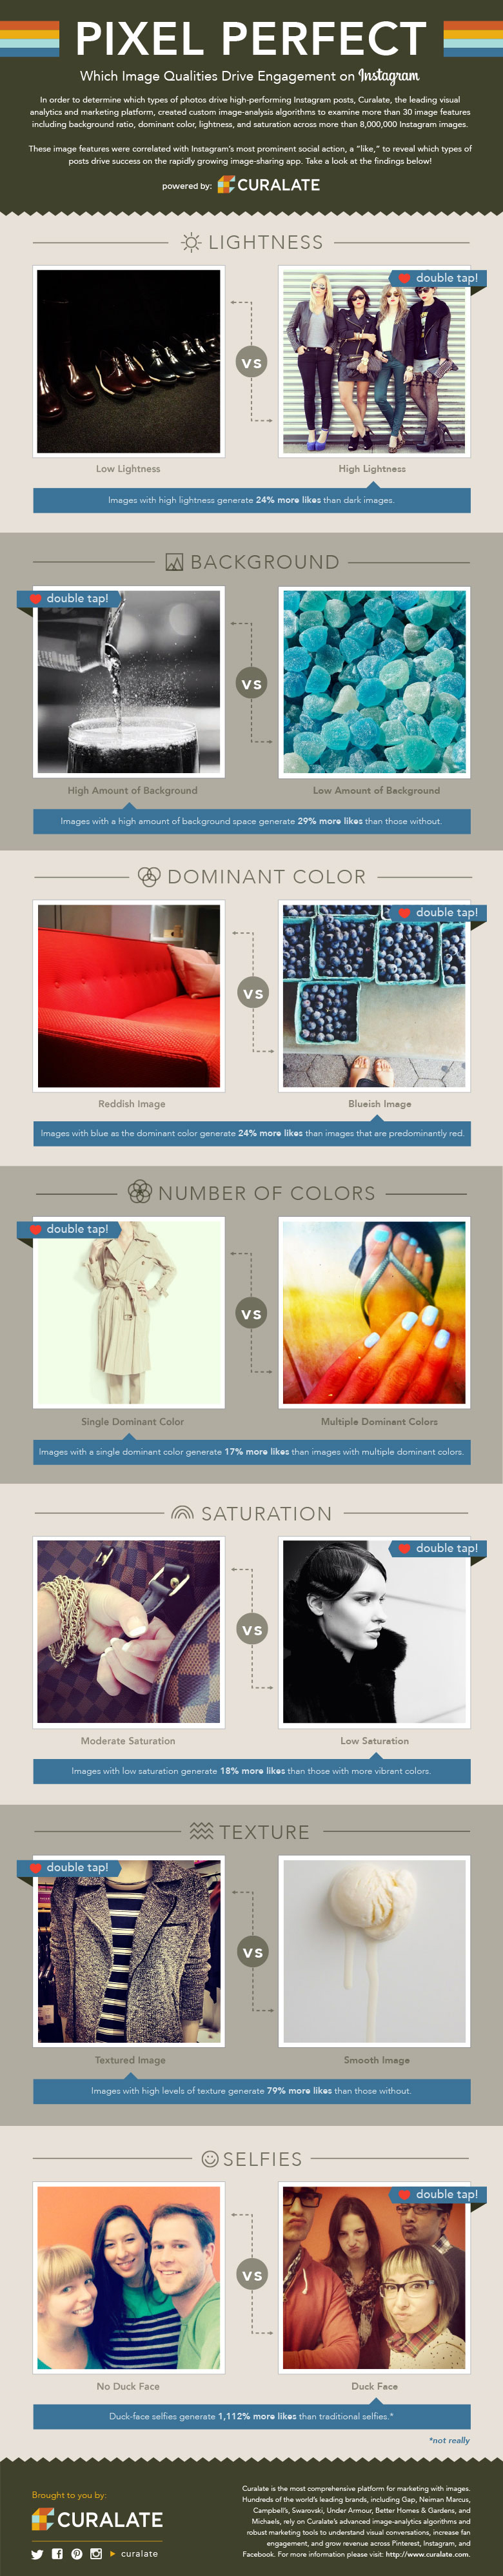 7 Tips to Instagram Photos That Will Get You More Likes [Infographic]